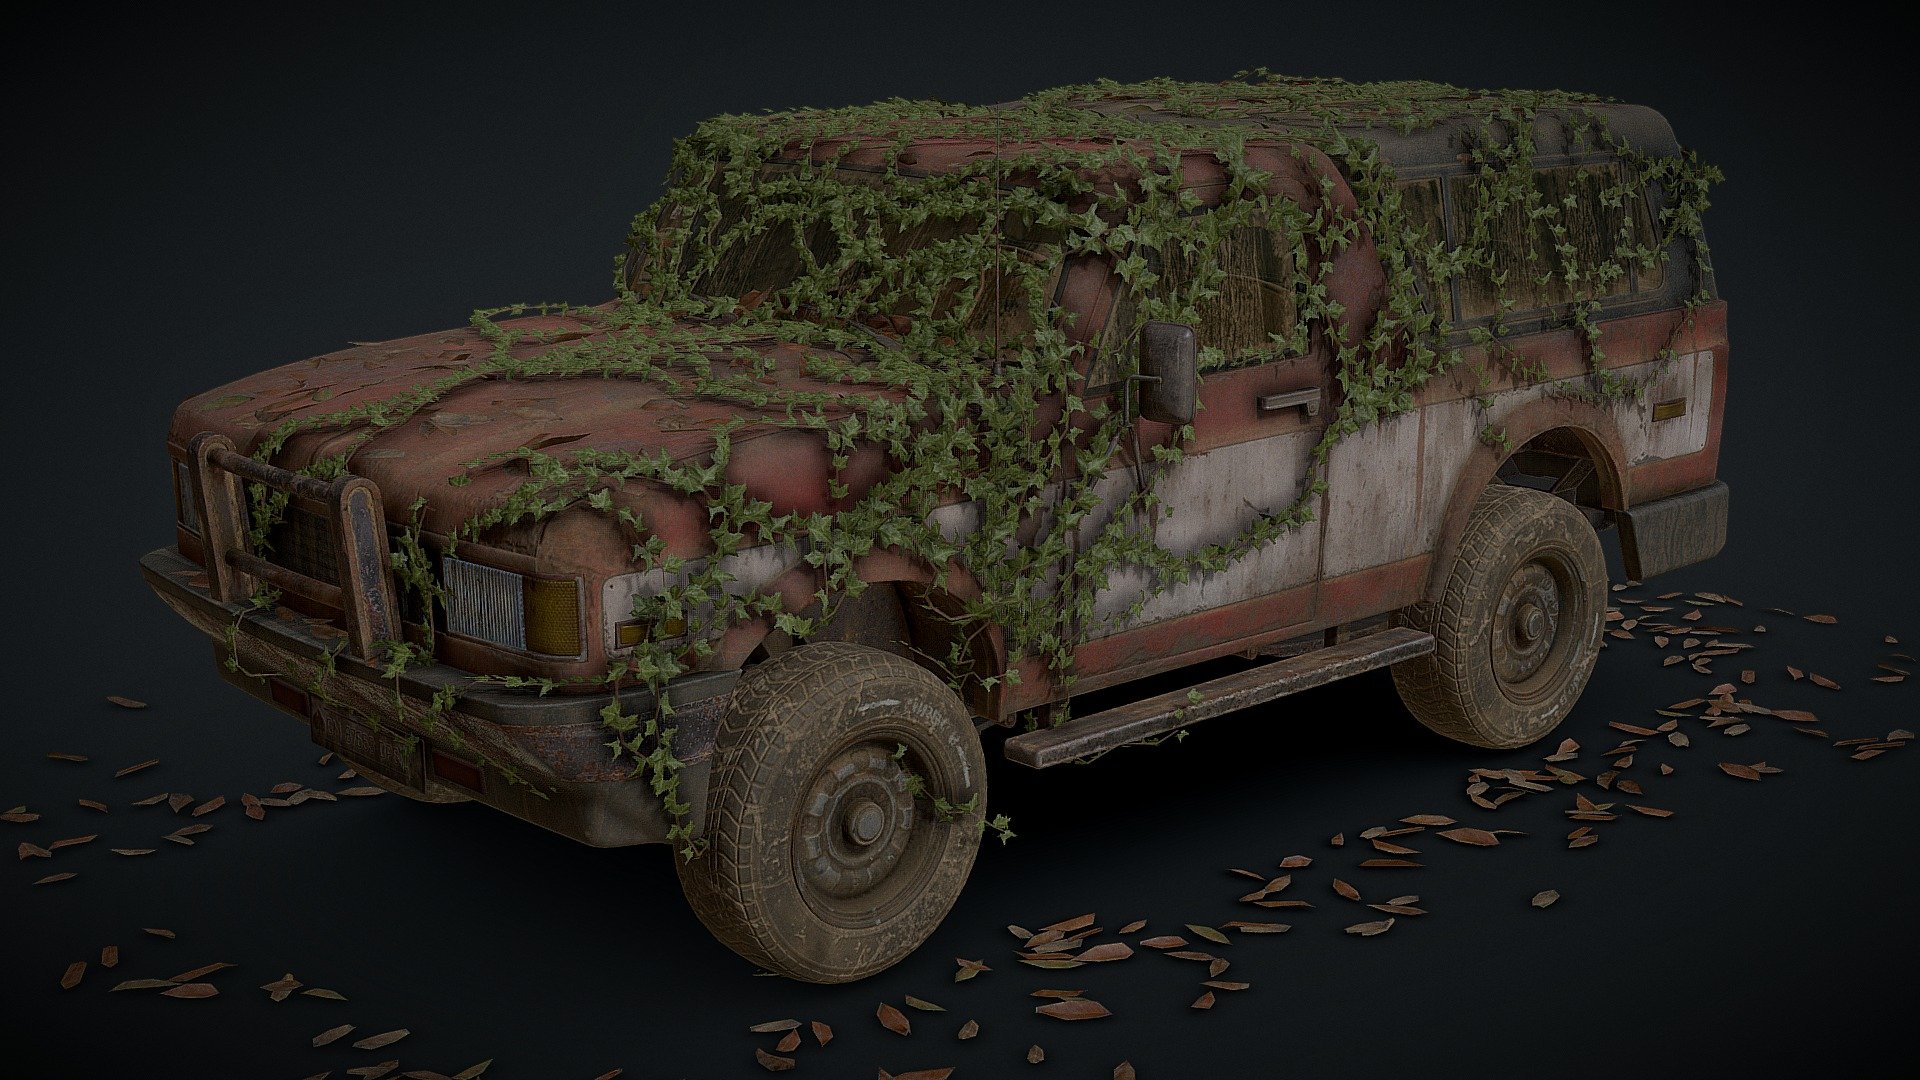 Animated Version: https://sketchfab.com/3d-models/abandoned-suv-truck-hero-quality-animated-7065090ed2004663929e7961122be52e

This is a game-ready and rigged SUV, suitable for apocalyptic/abandoned environments. Meticulously detailed, with a high quality interior, engine and base. This model looks great up close and at a distance.

Optimized for the sketchfab viewer, all textures are included at 4k.

Six Albedo Variations

PBR Texture Files Included:




Albedo

Roughness

Metallic

Normal (DirectX)

Normal (OpenGL)

Emissive

Ambient Occlusion

Skeleton Includes:




Steering Wheel

Gear Stick

Wheels

Boot

Bonnet/Hood

Doors

Copyright free, made from custom concepts with no branding, loosely based on a popular American SUV 3d model